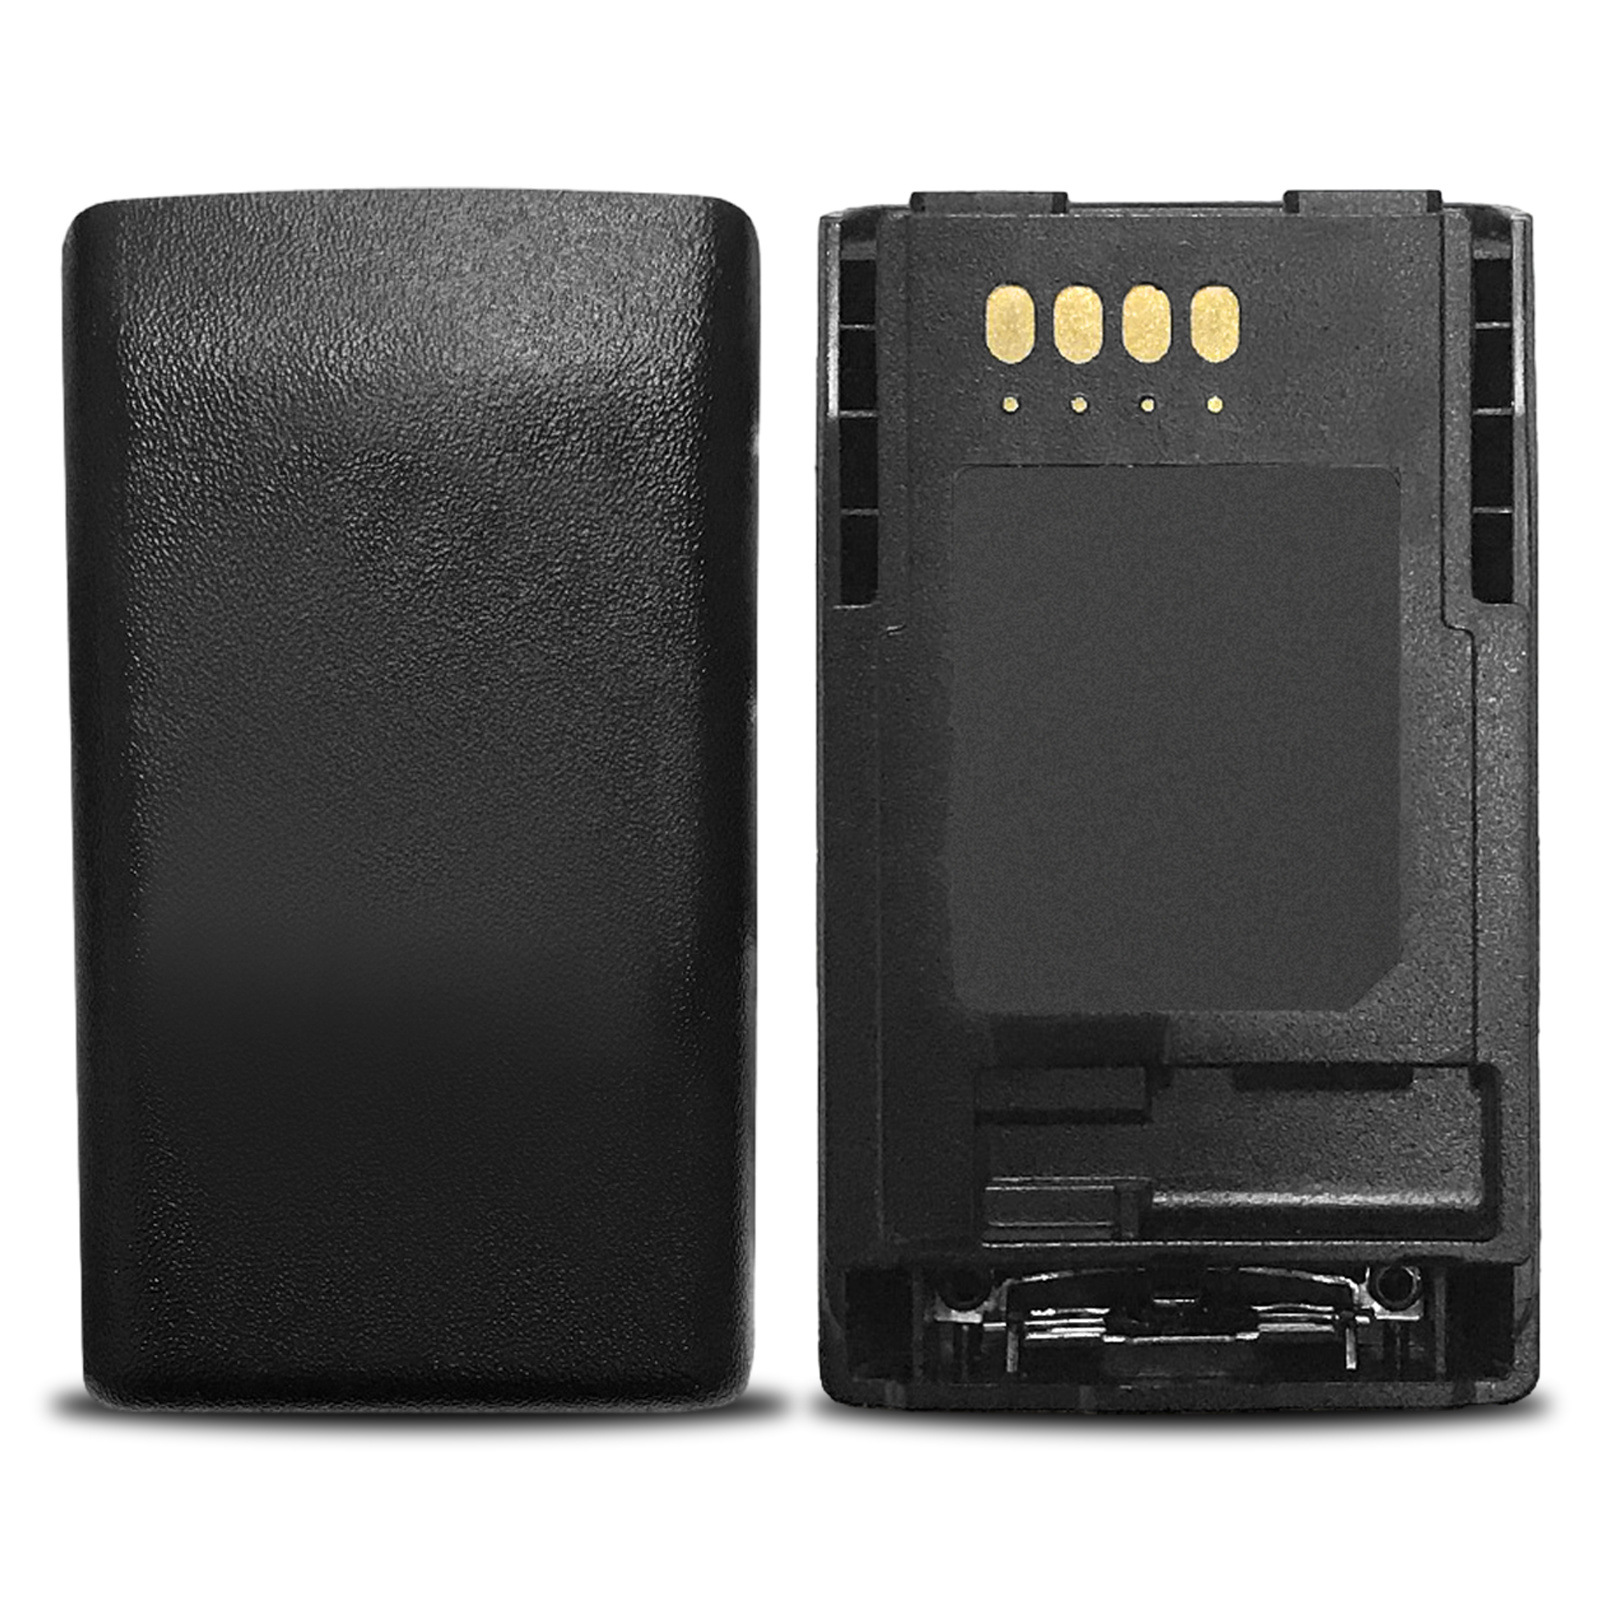 JINTION PMNN4351 Two way radio battery pack walkie talkie battery custom for motorola MTP850 MTP750 MTP800 MTP810 MTP830 MTP850S